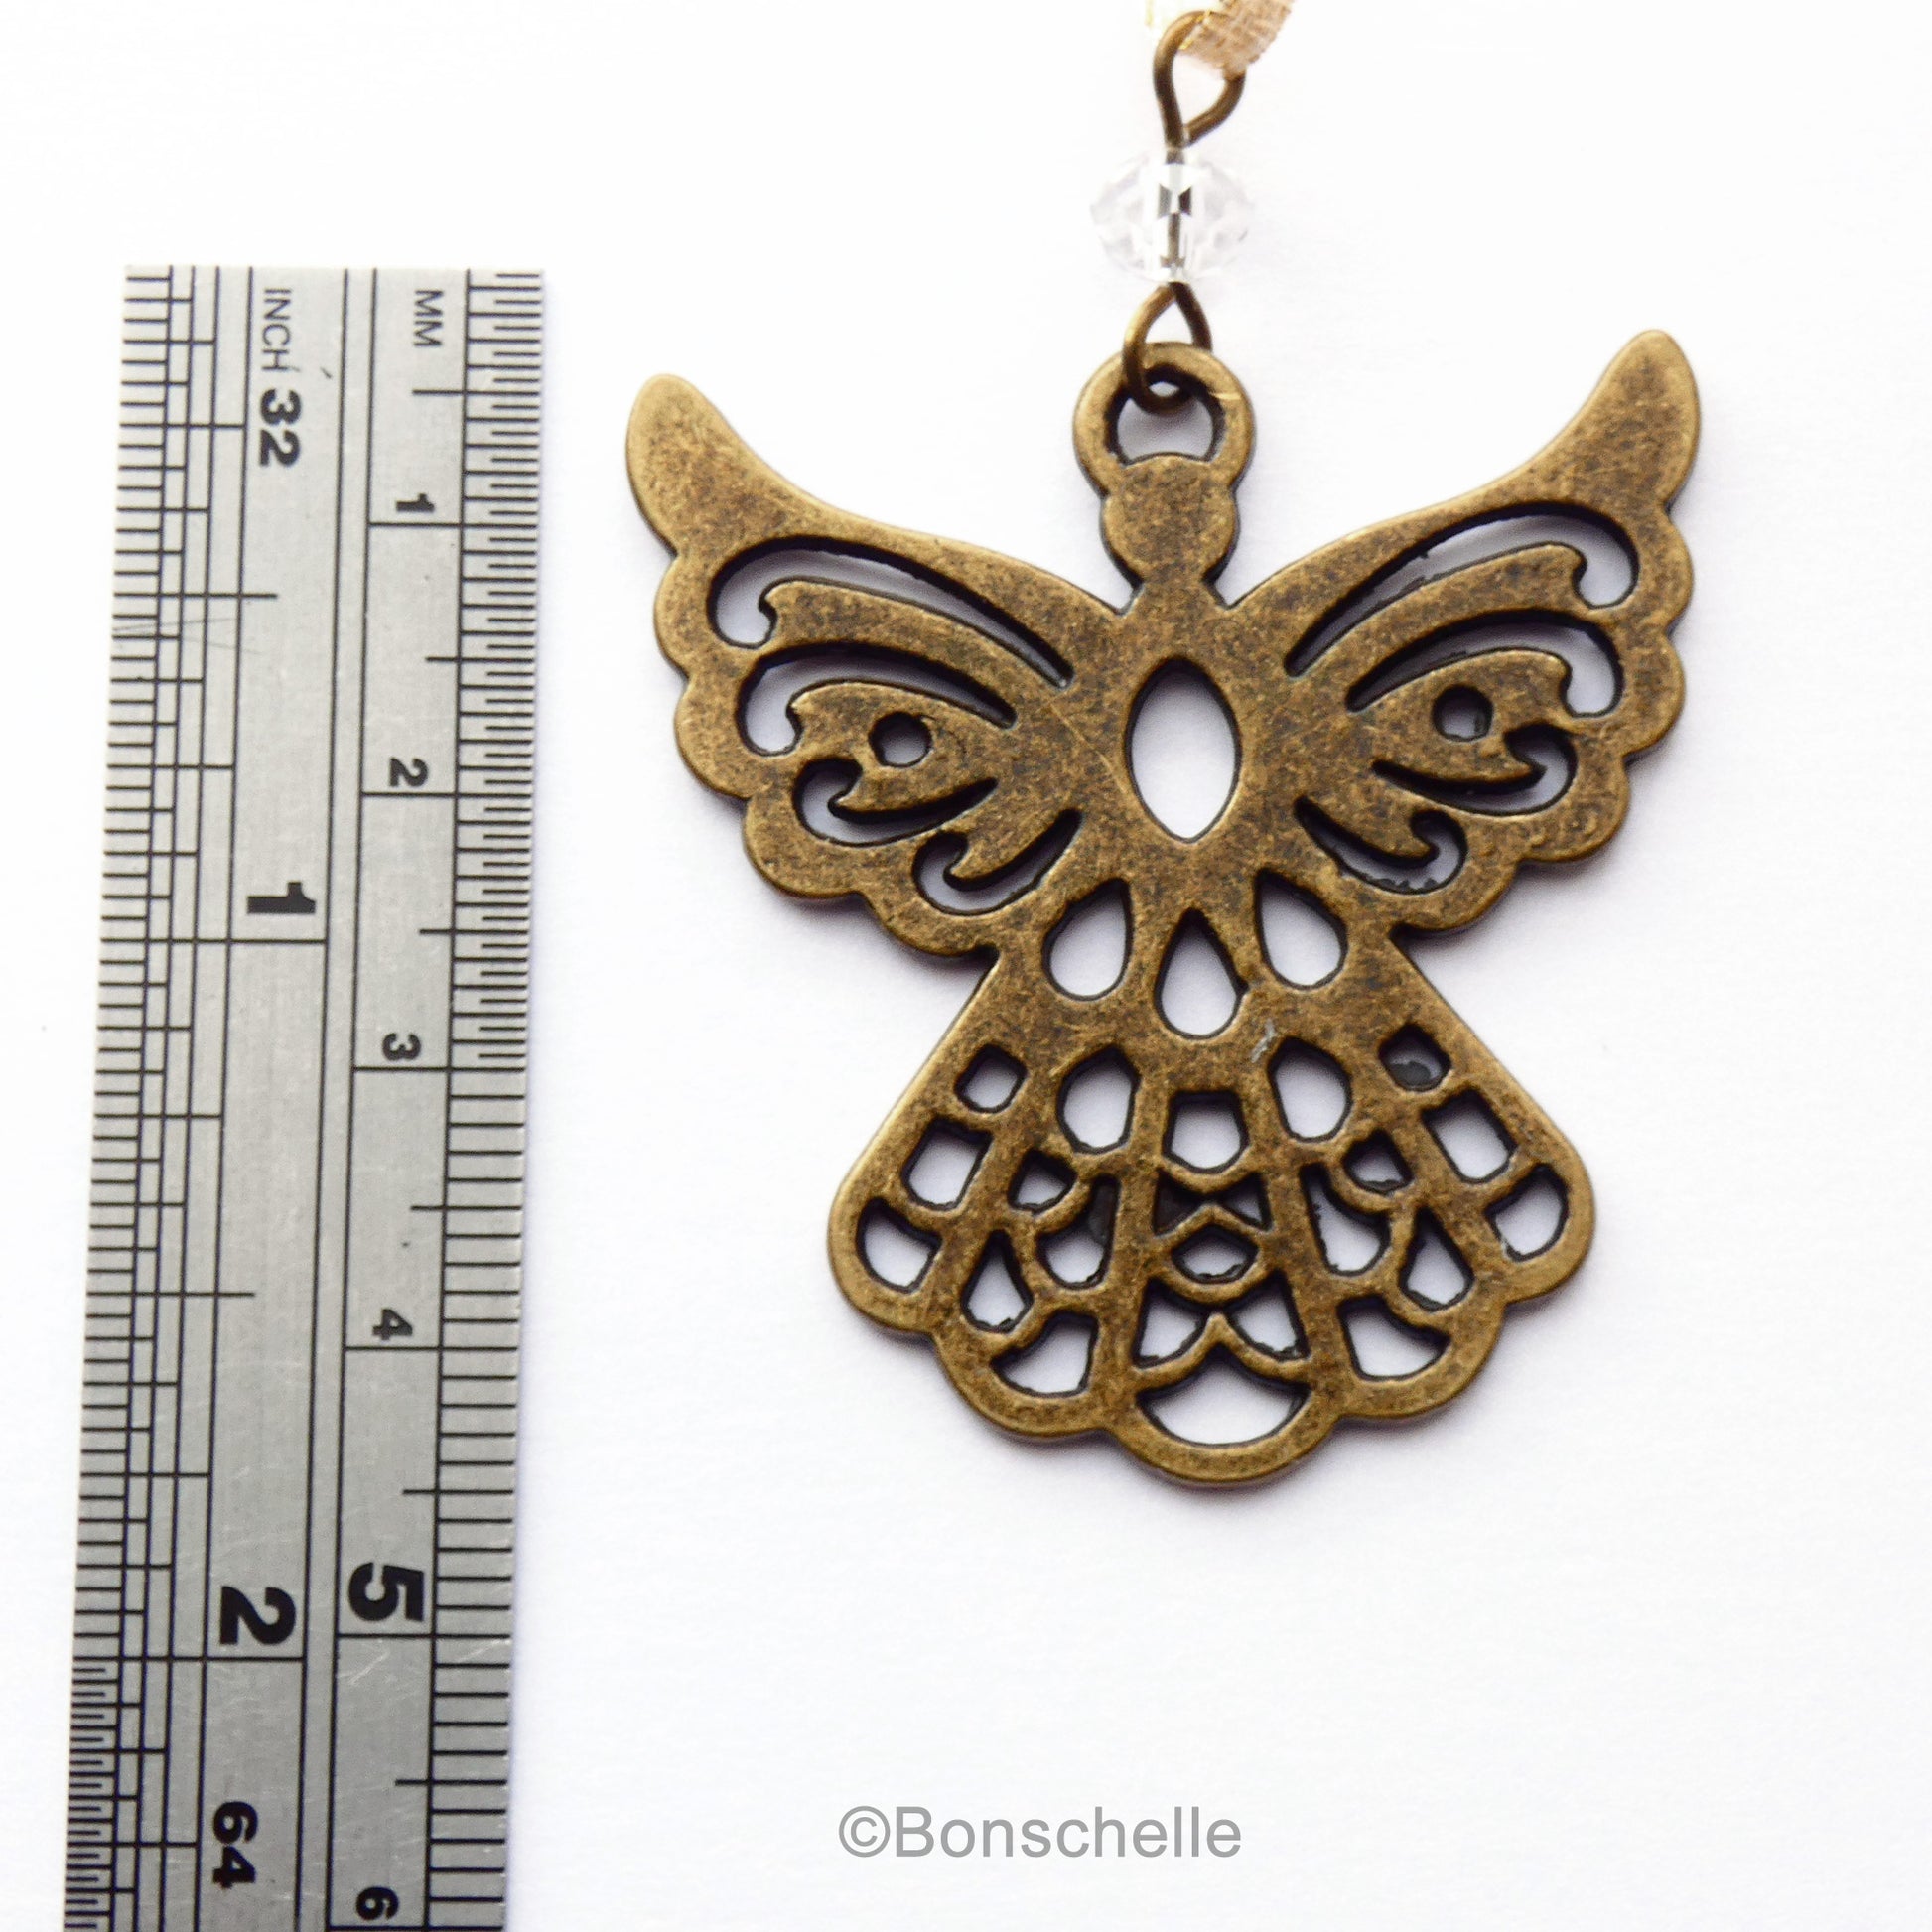 Antique bronze toned filigree style christmas angel ornament shown to scale.